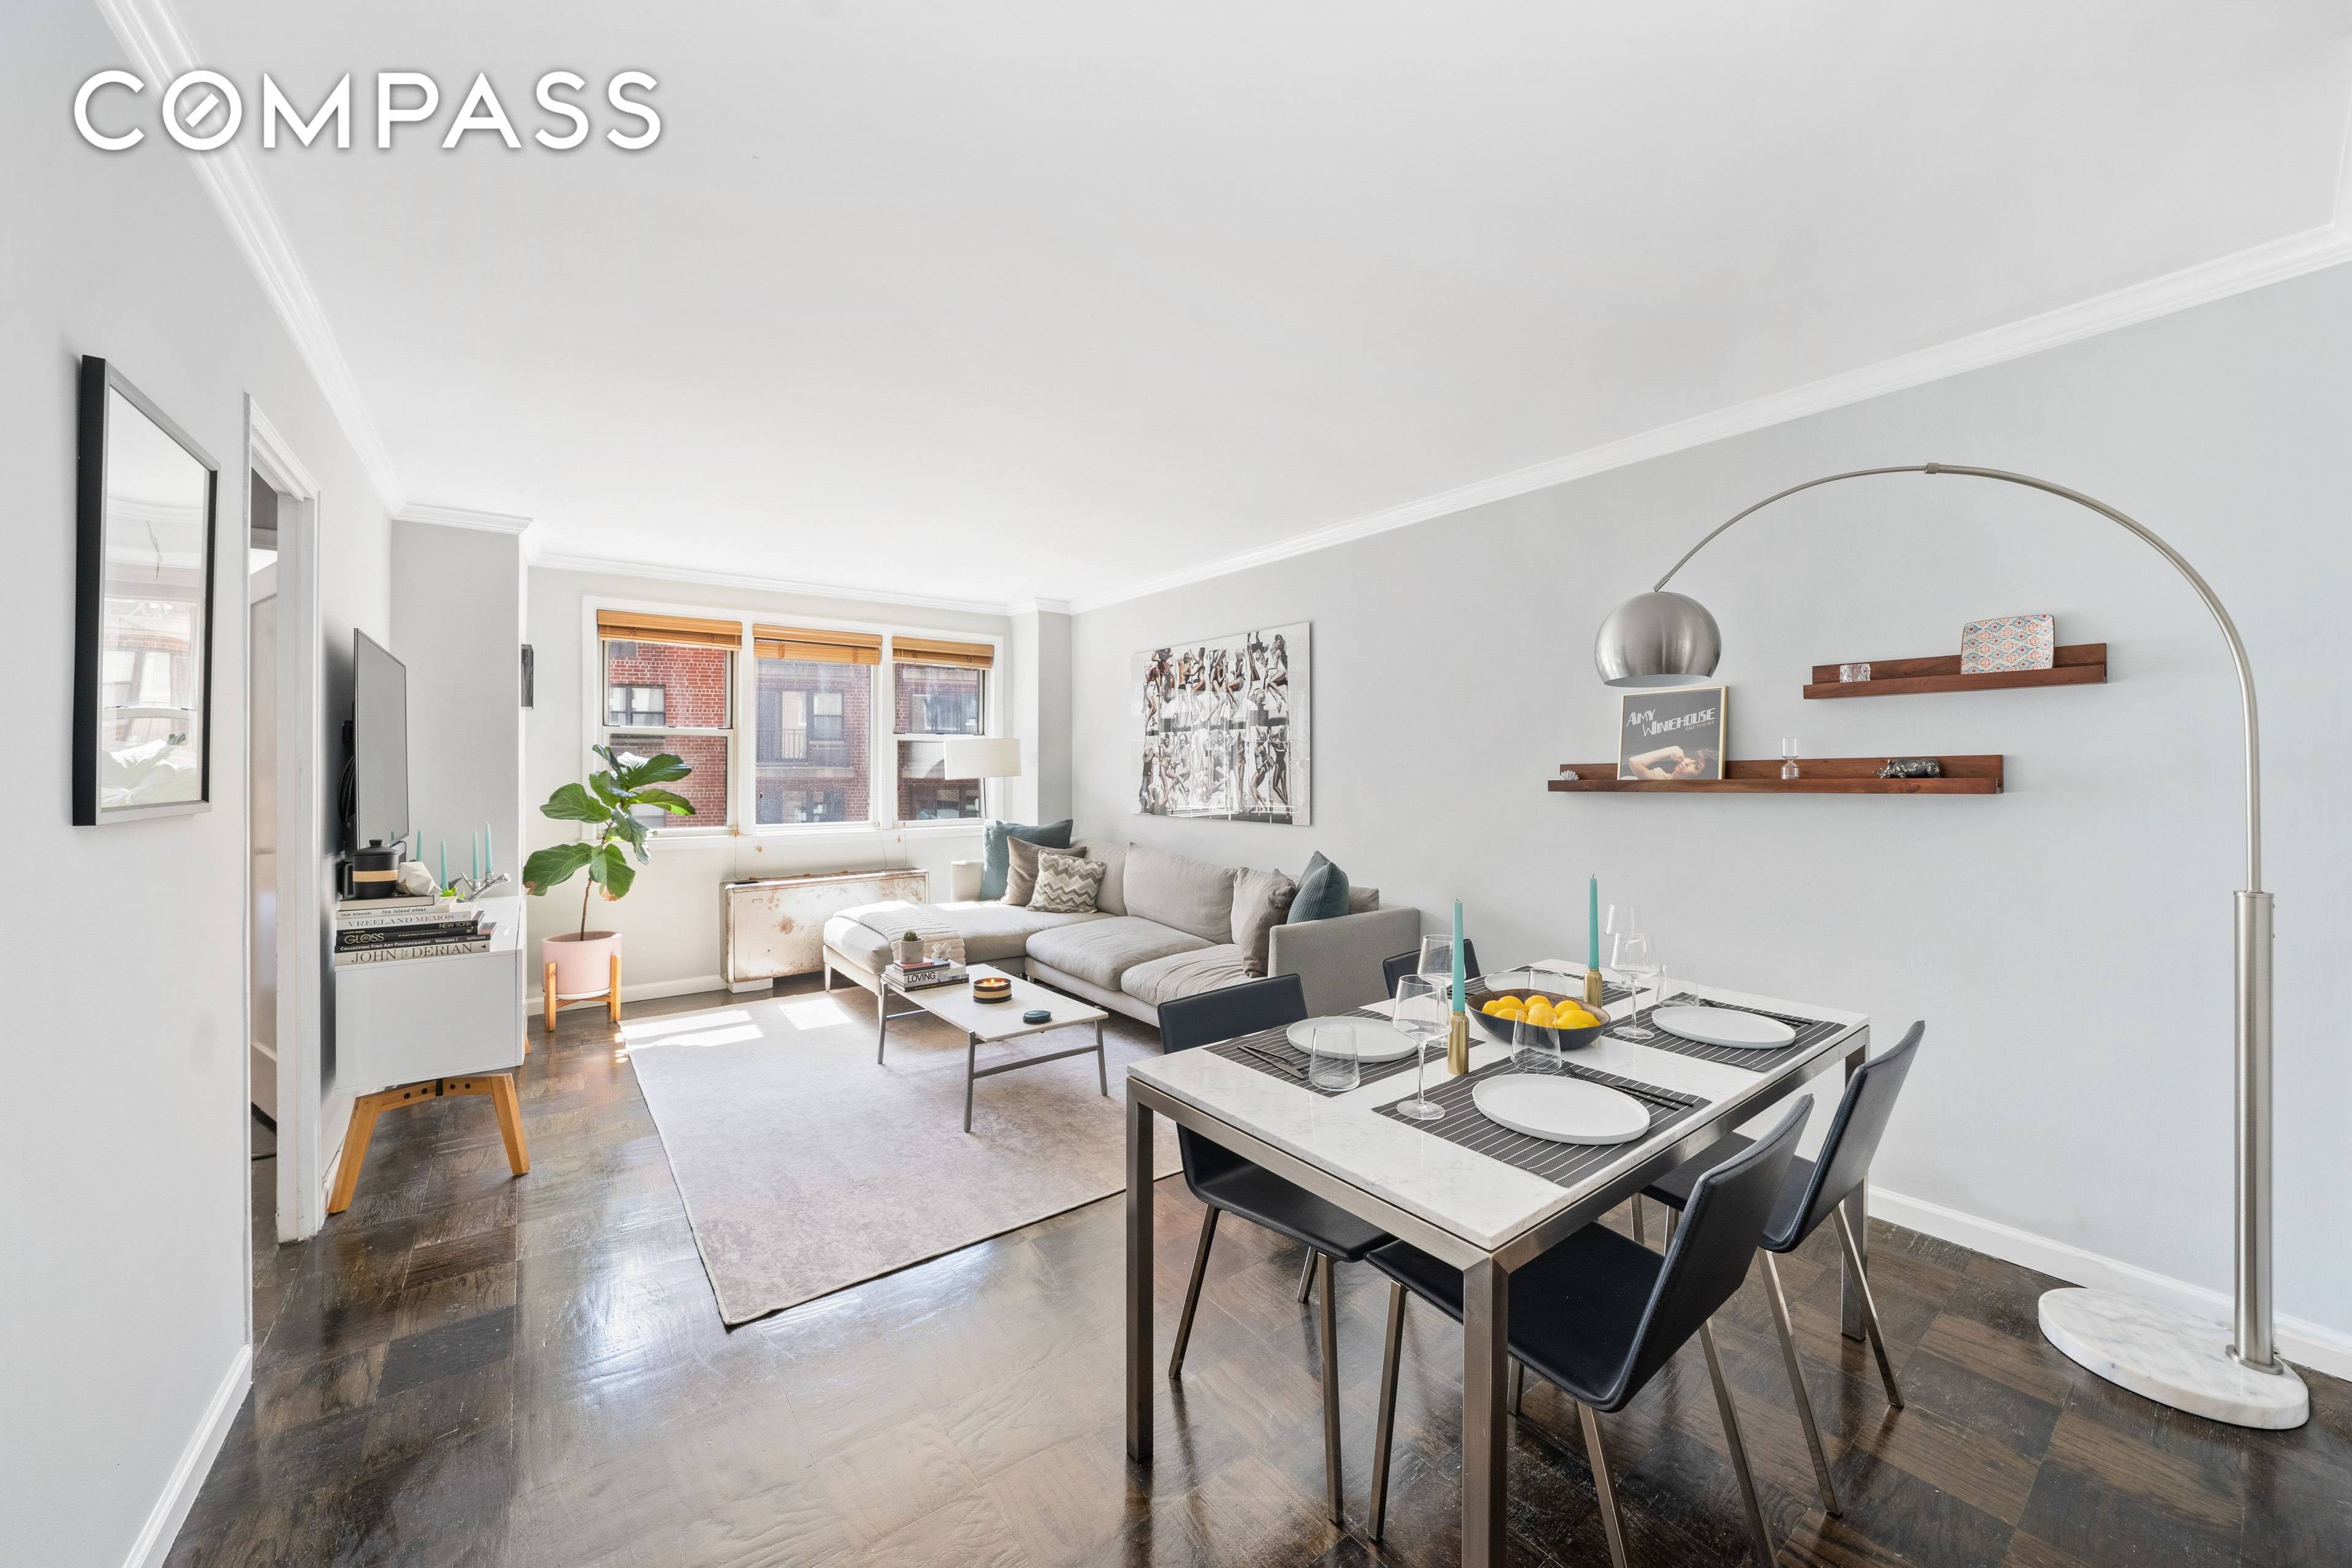 NEW PRICE 77 E. 12th St. Unit 10 G is a stylish amp ; chic residence located in a highly sought after, full service Cooperative in Central Greenwich Village.